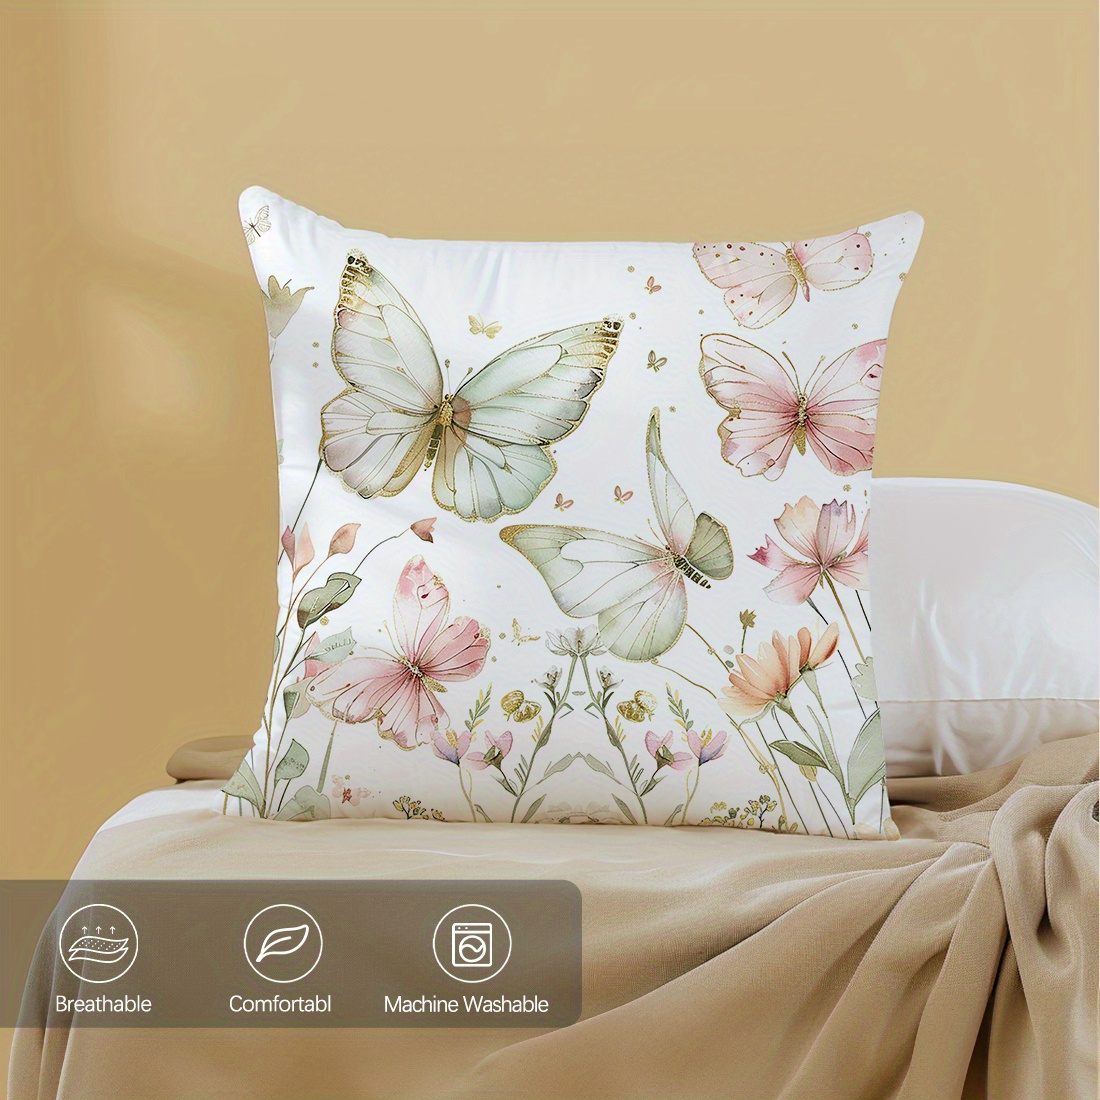 

1pc Butterfly & Floral Print Soft Peach Skin Velvet Pillow Cover 45cm X 45cm (17.7in X 17.7in), Contemporary Style, Single-sided Cushion Case For Sofa, Breathable And Machine Washable